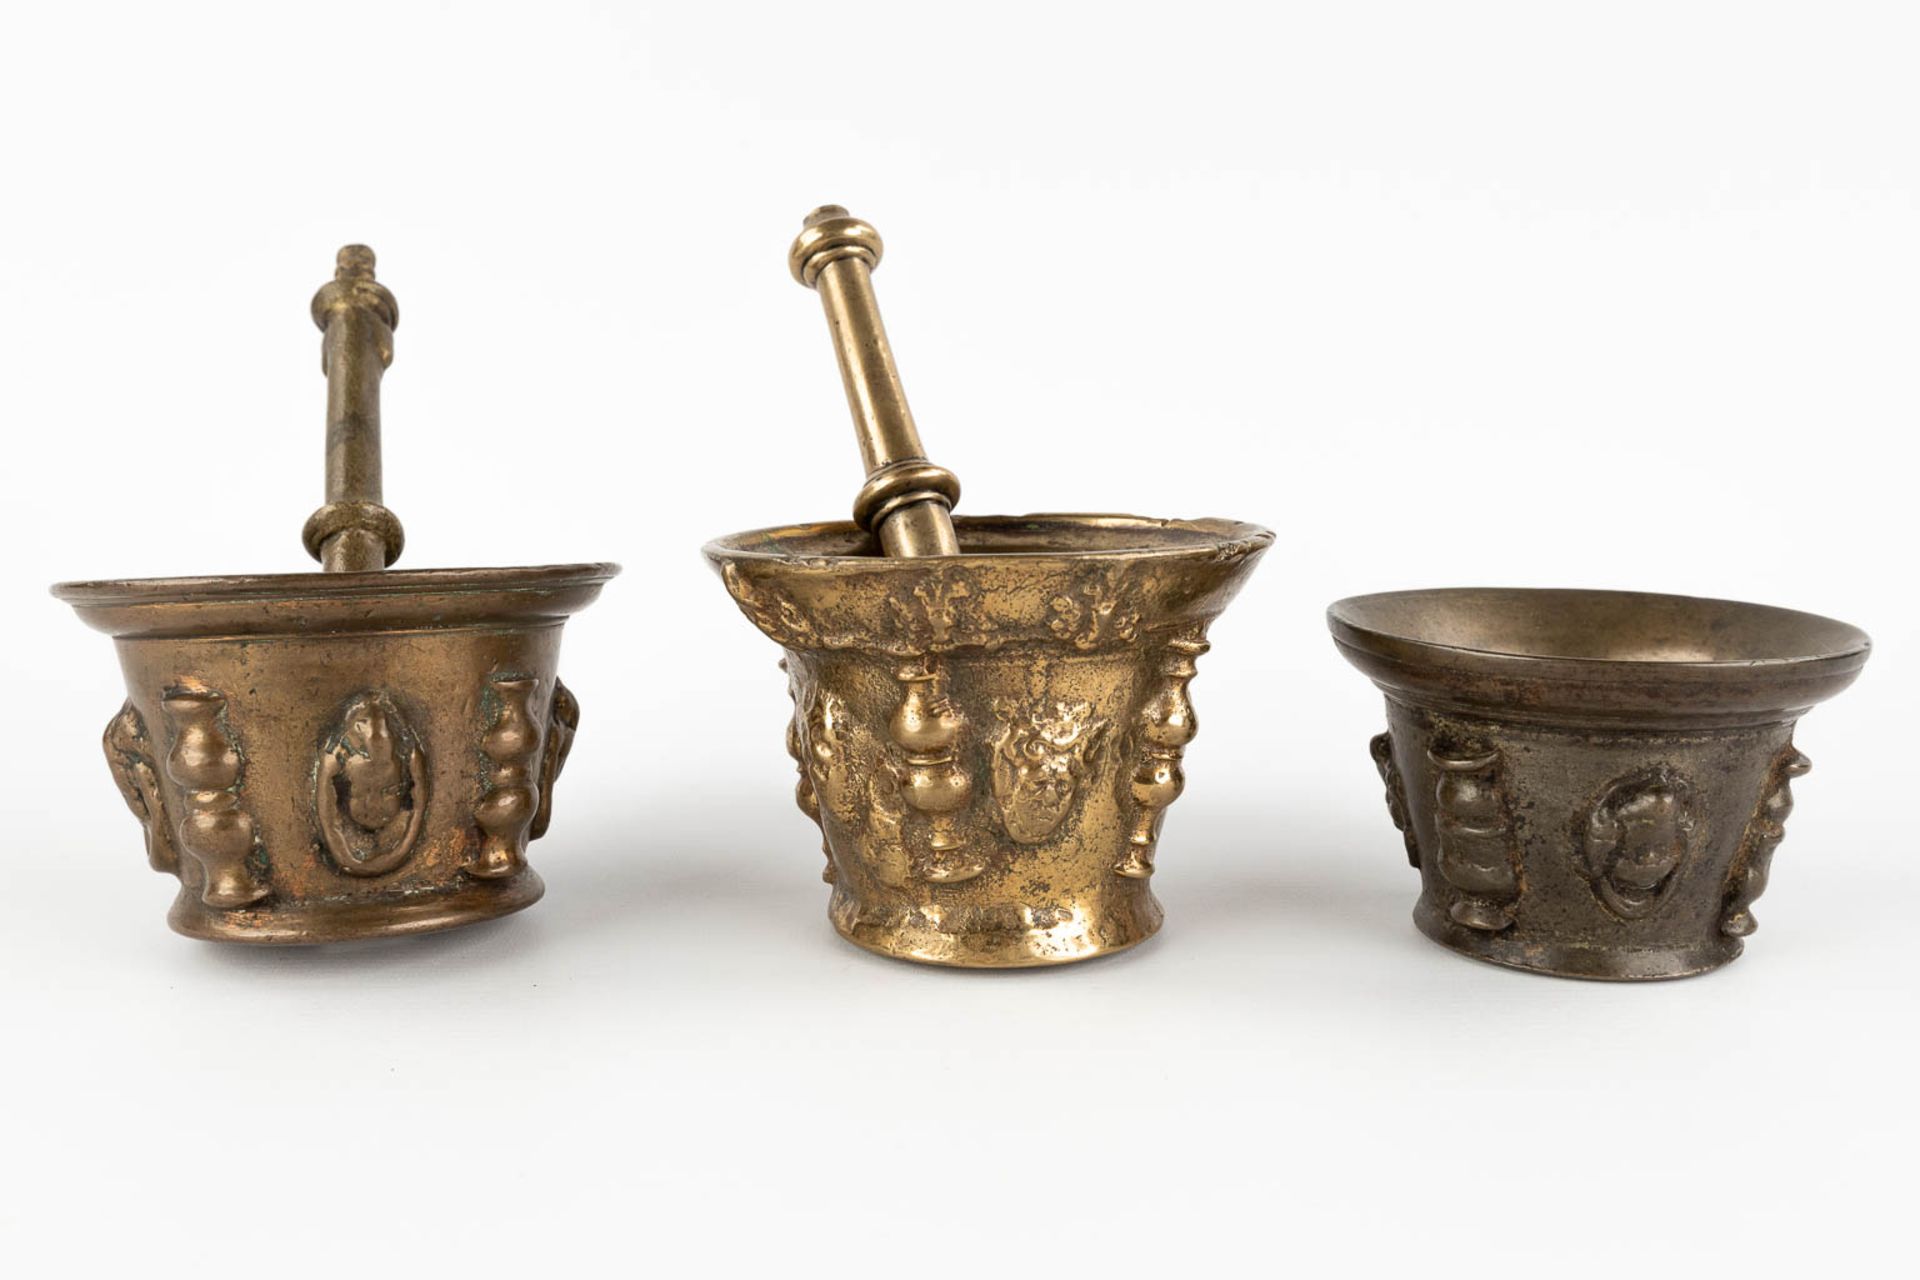 Three antique mortars with two pestles, bronze. Probably Spain, 17th/18th C. (H:9 x D:13 cm) - Image 6 of 12